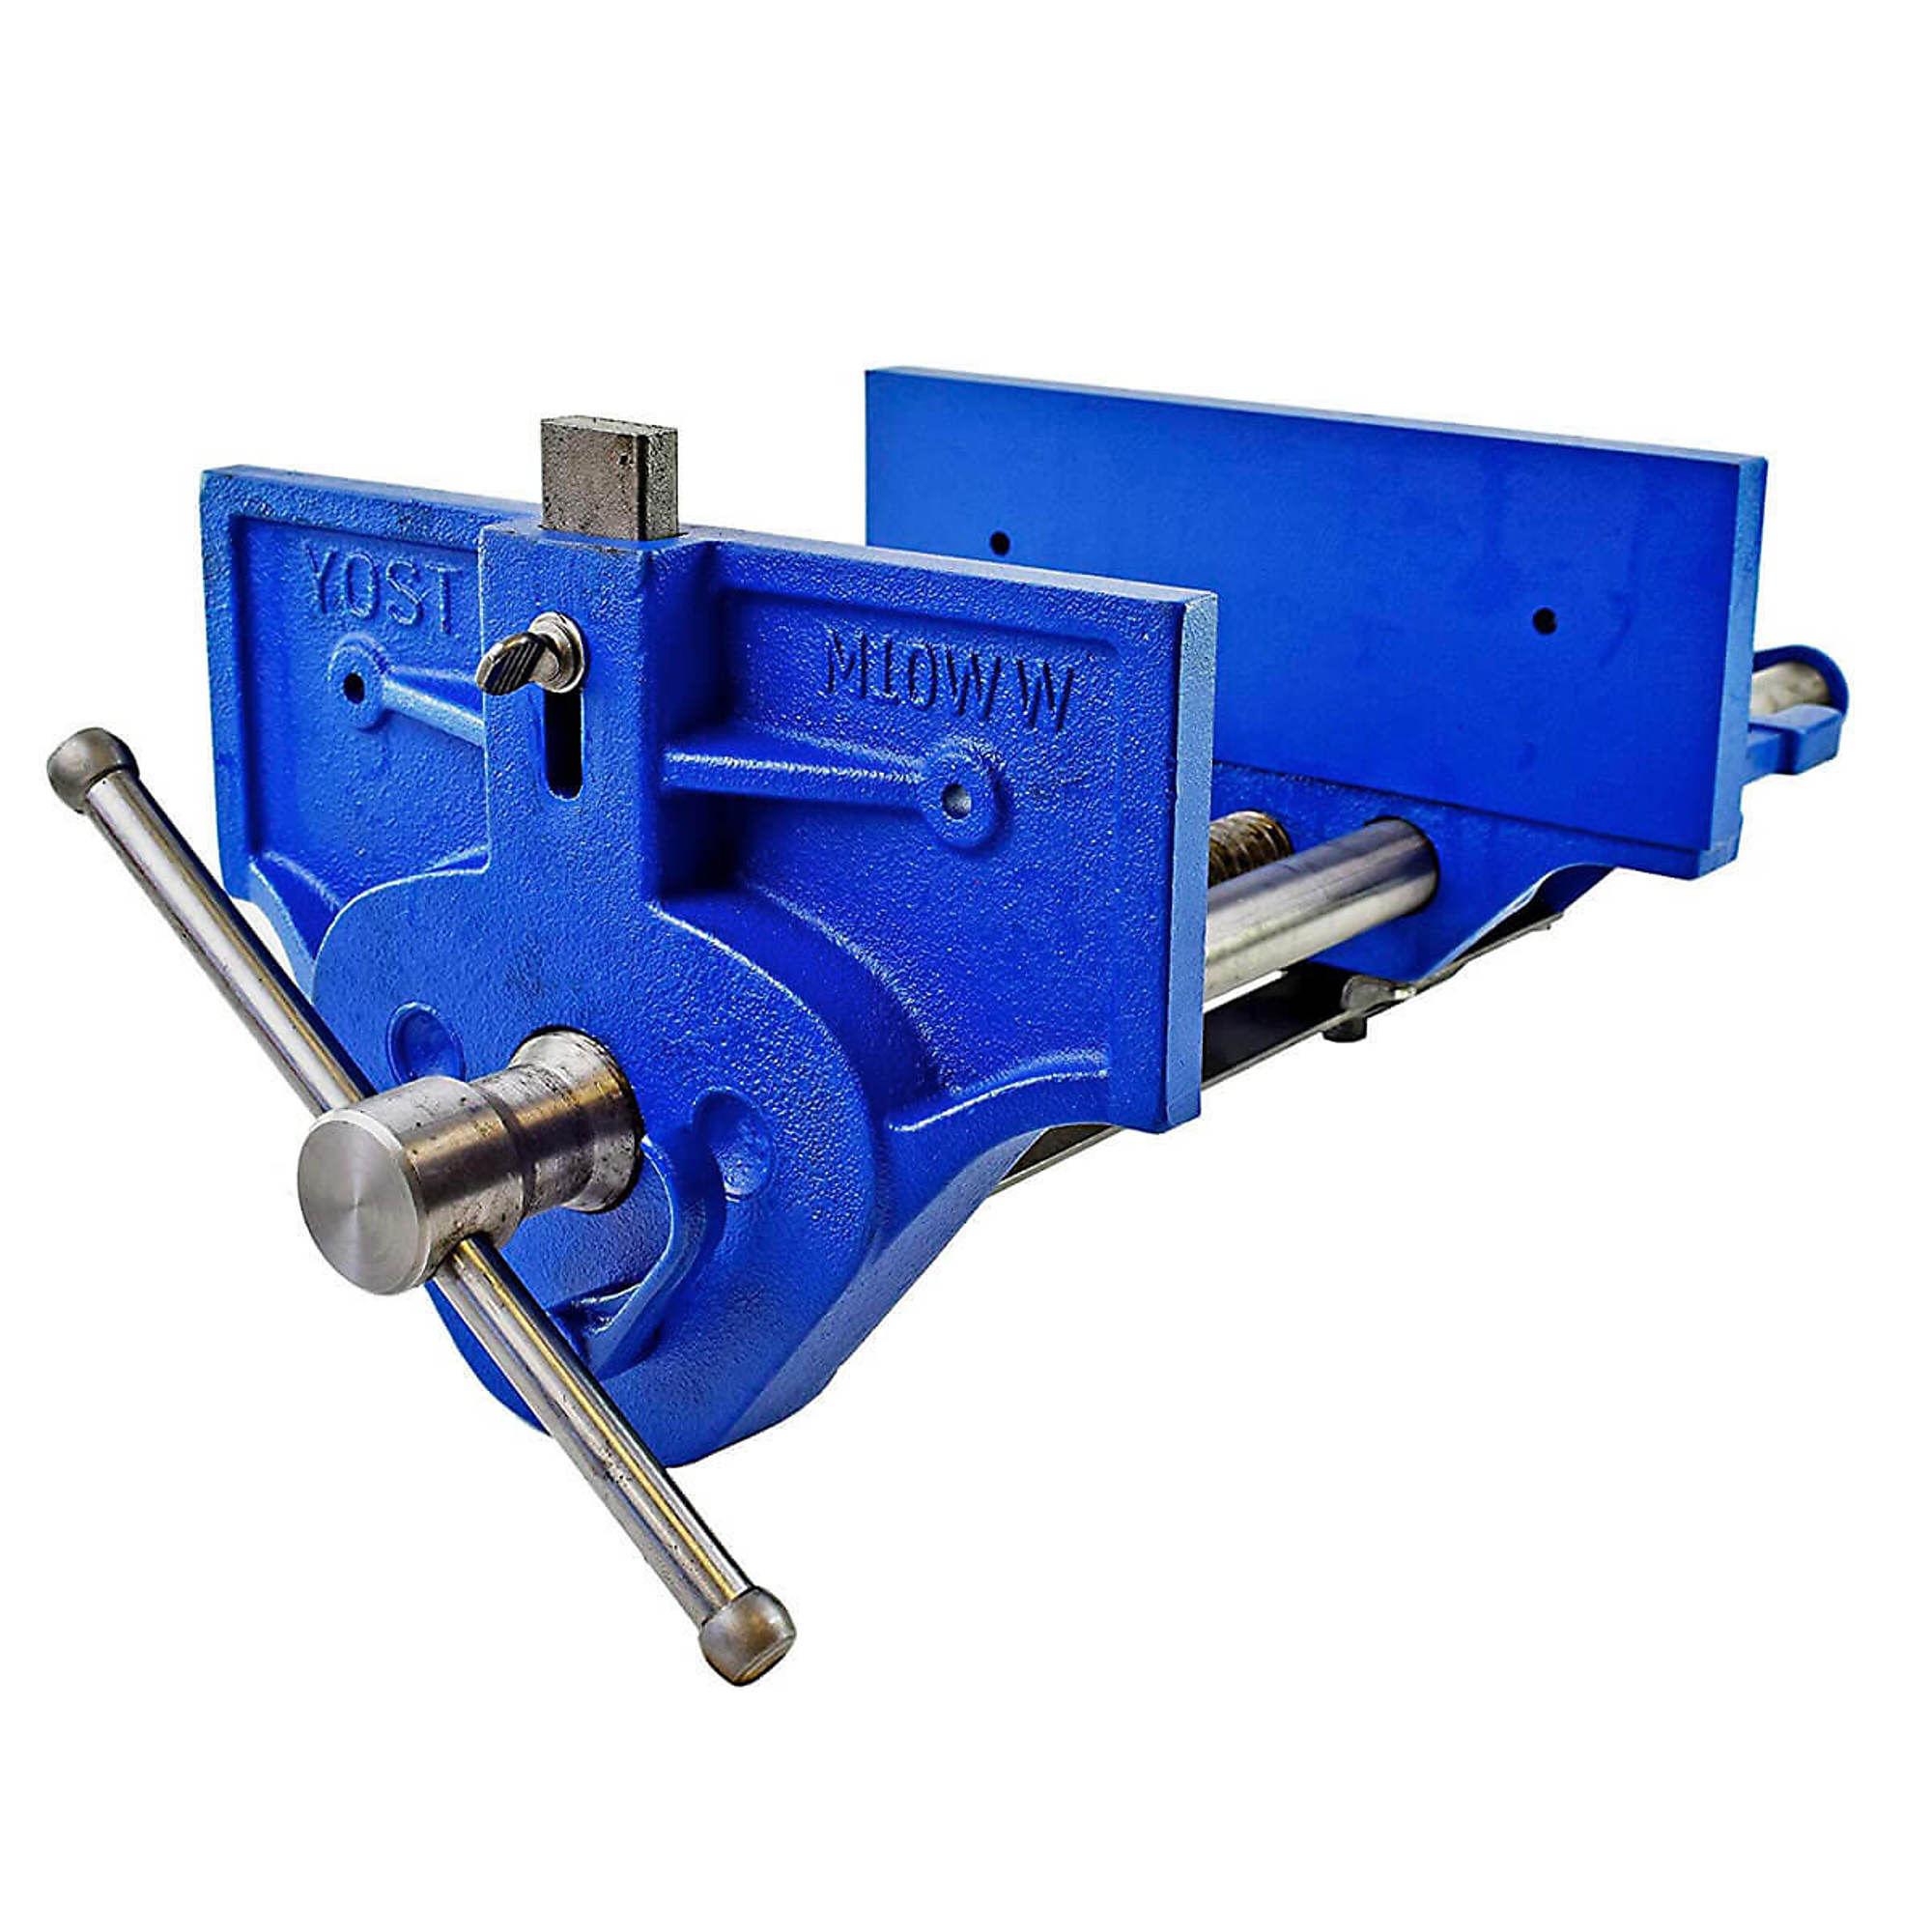 Yost Vises, 10Inch Woodworking Vise, Jaw Width 10.5 in, Jaw Capacity 14.875 in, Material Cast Iron, Model M10WW